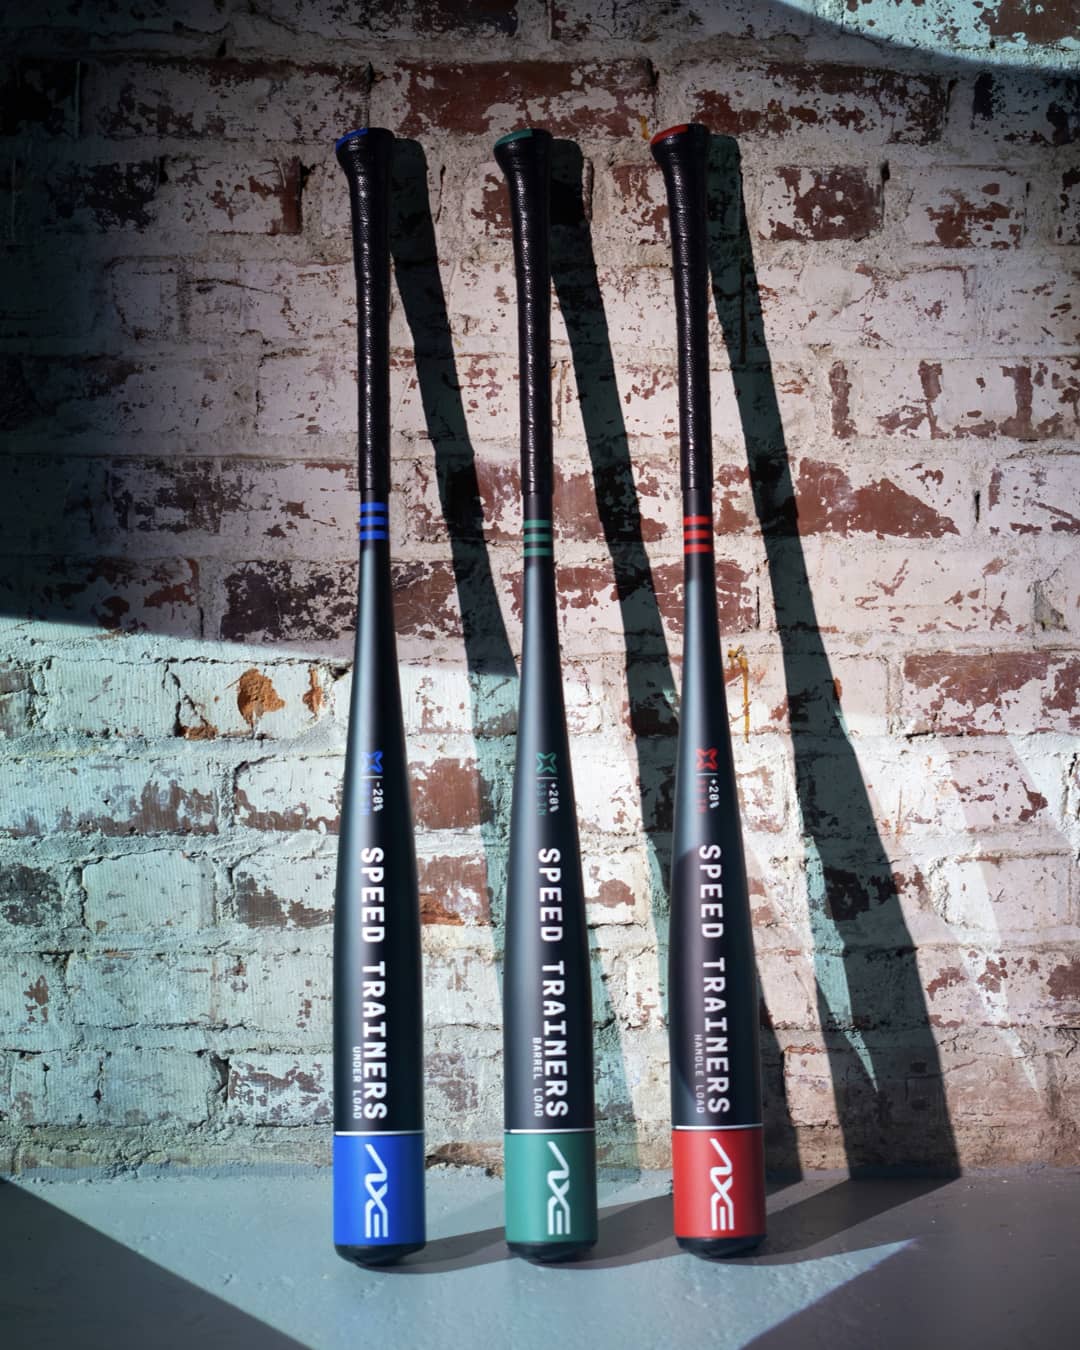 Axe Speed Trainers Bat Set powered by Driveline Baseball